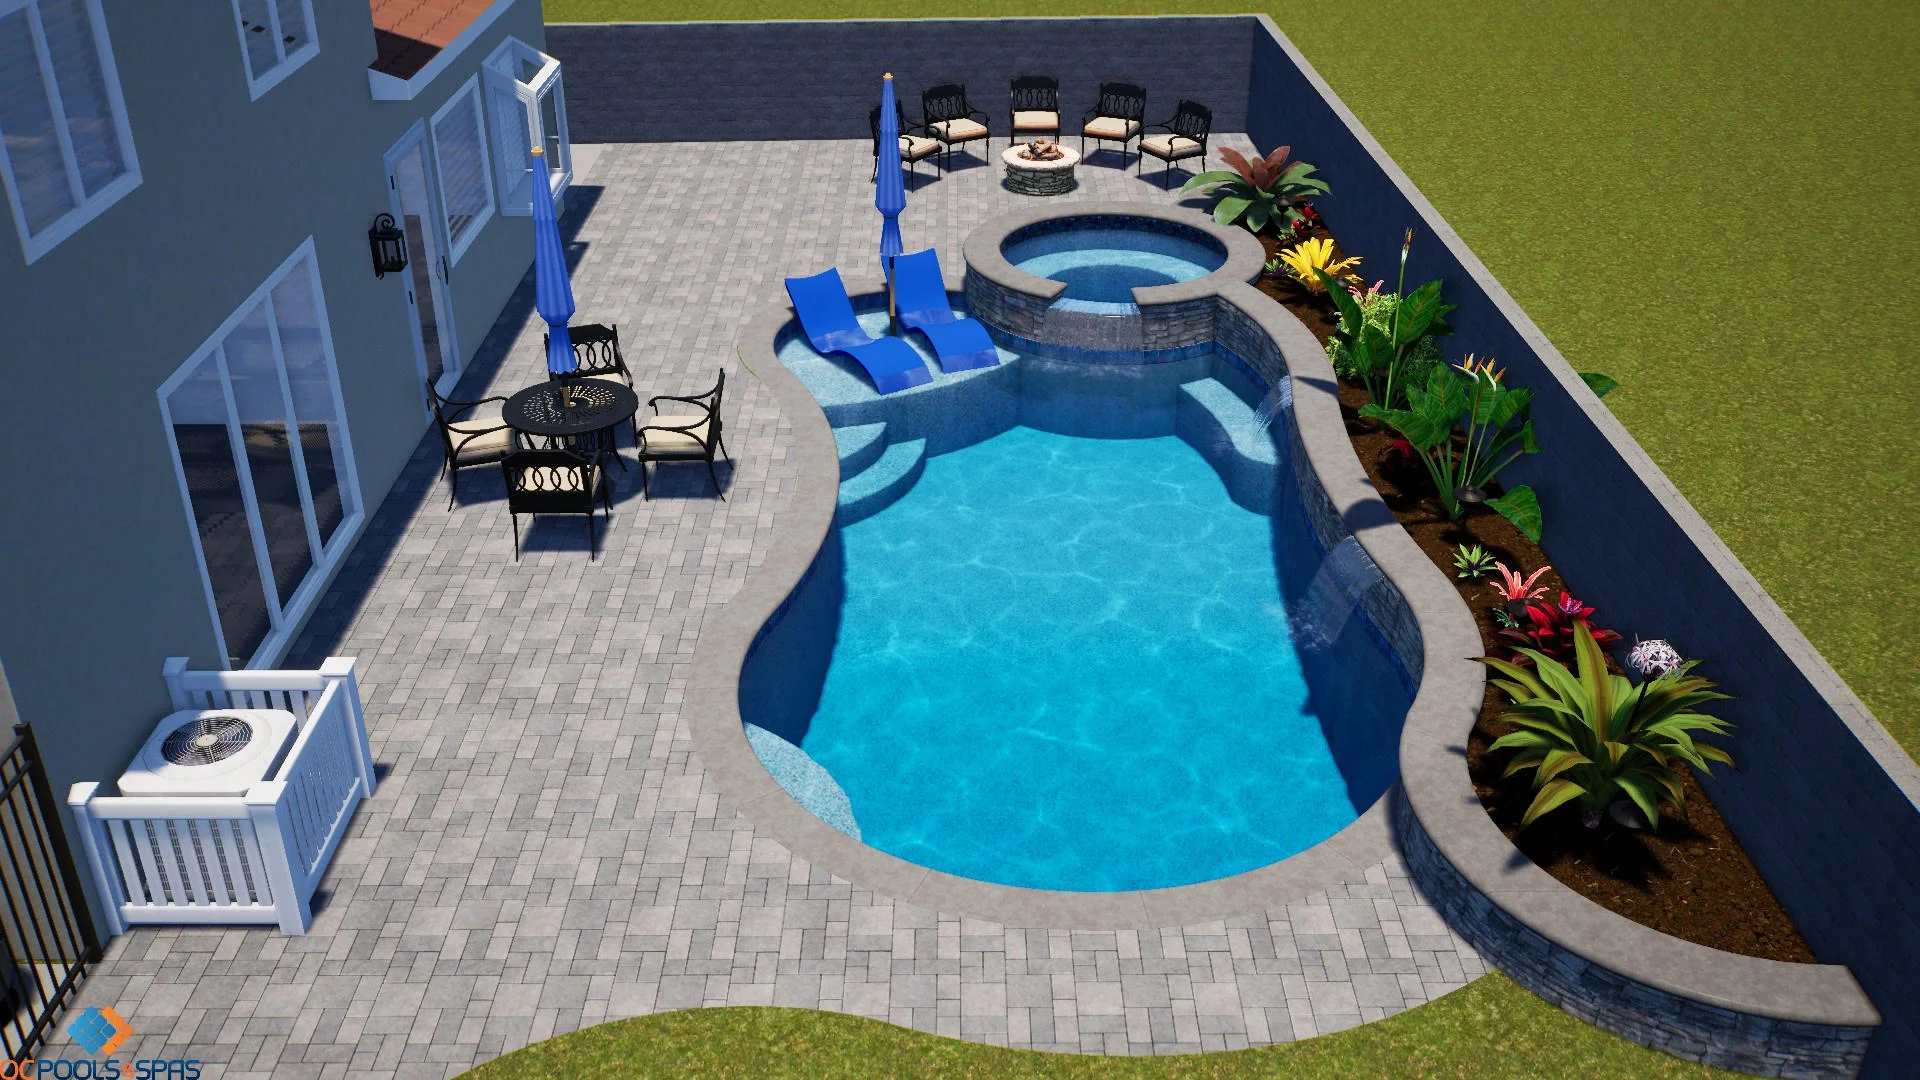 What are the popular pool fence ideas for upgrading your yard?